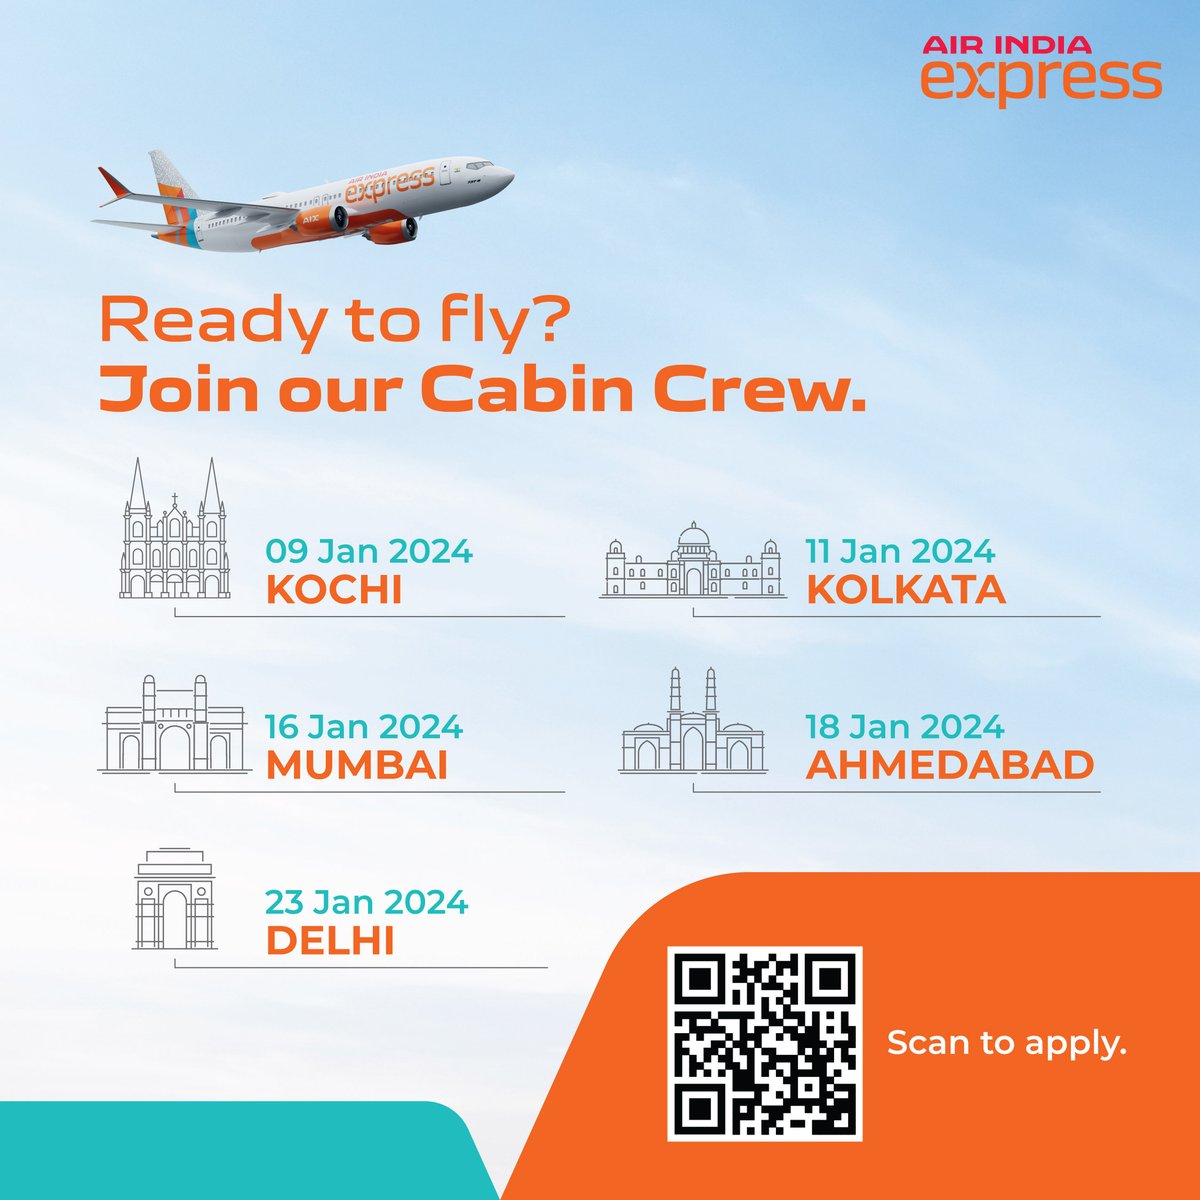 For those who dream sky-high. Come, and join our Cabin Crew. Scan the QR code to apply now! #JoinTheCrew